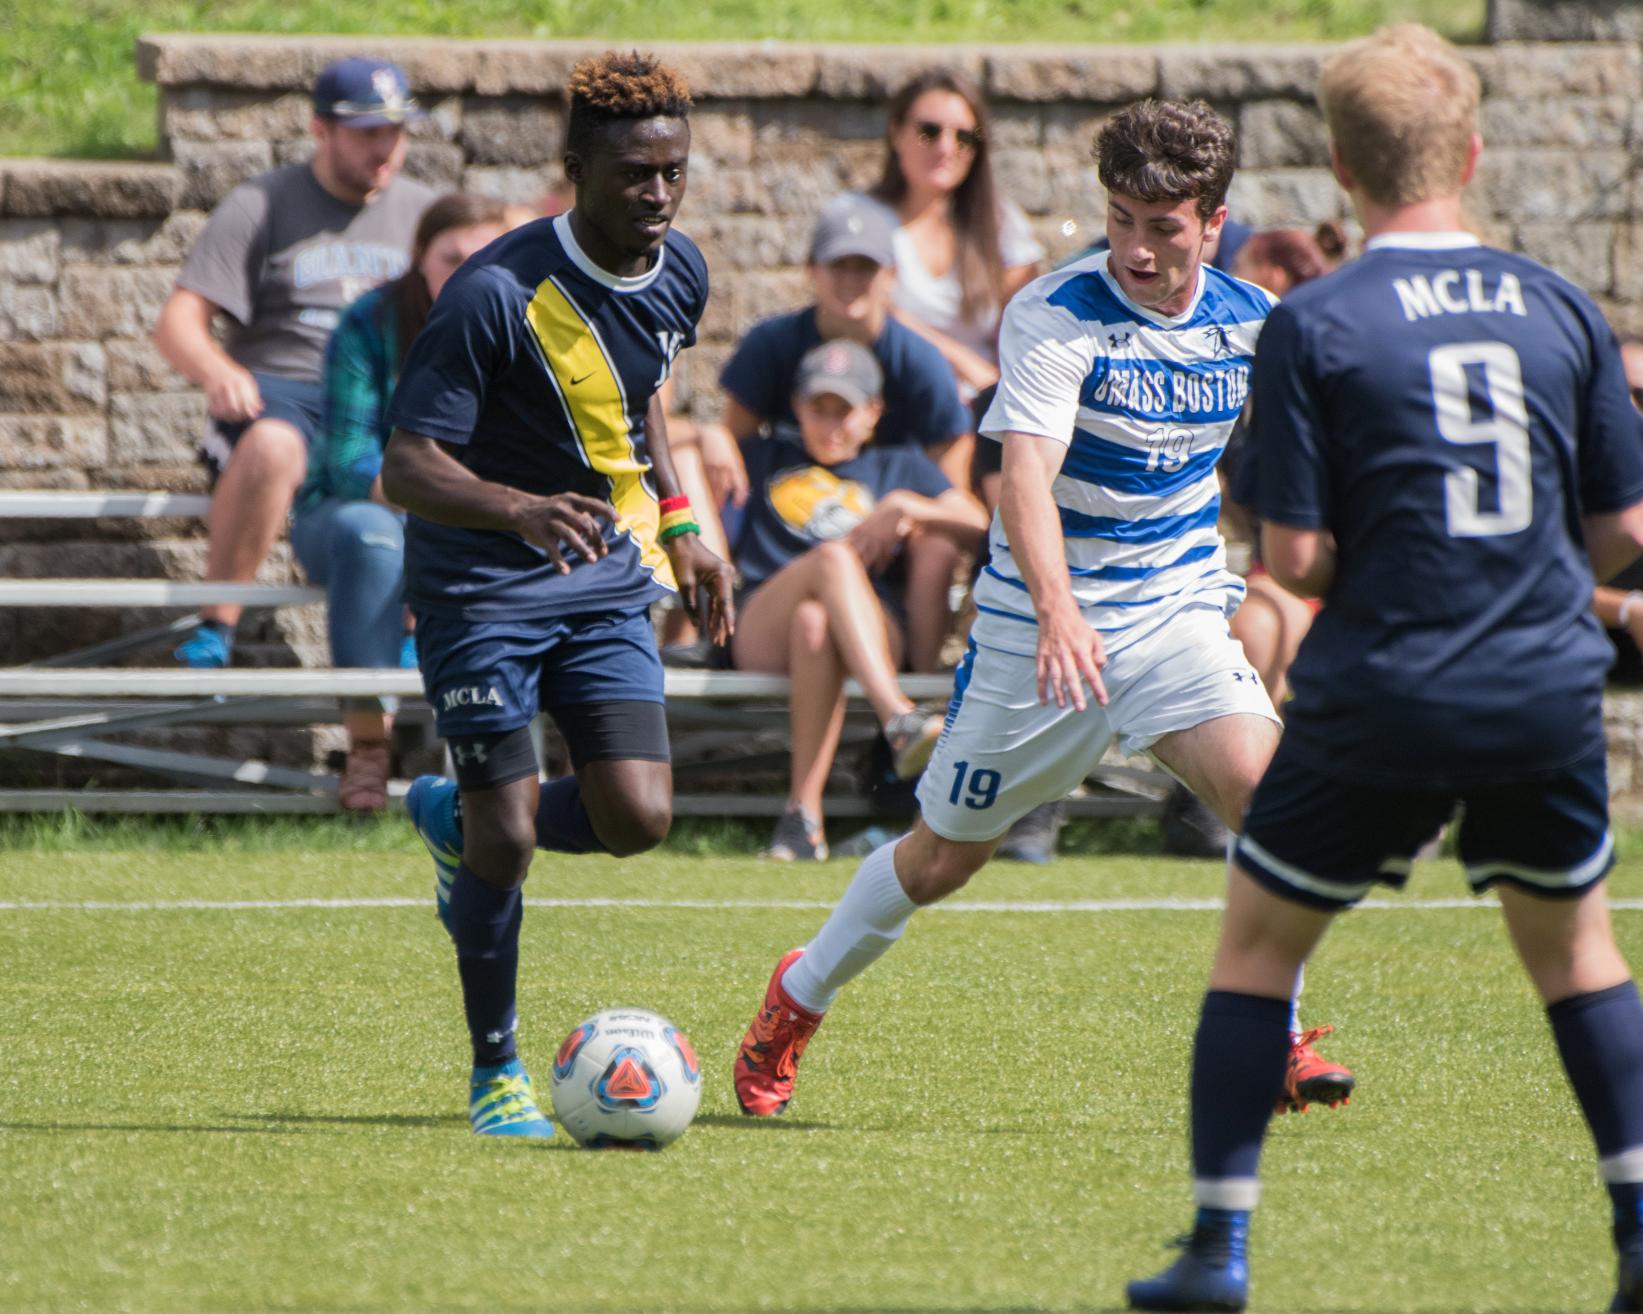 Boateng goal lifts Men's Soccer to non conference road win at SUNY Poly 1-0